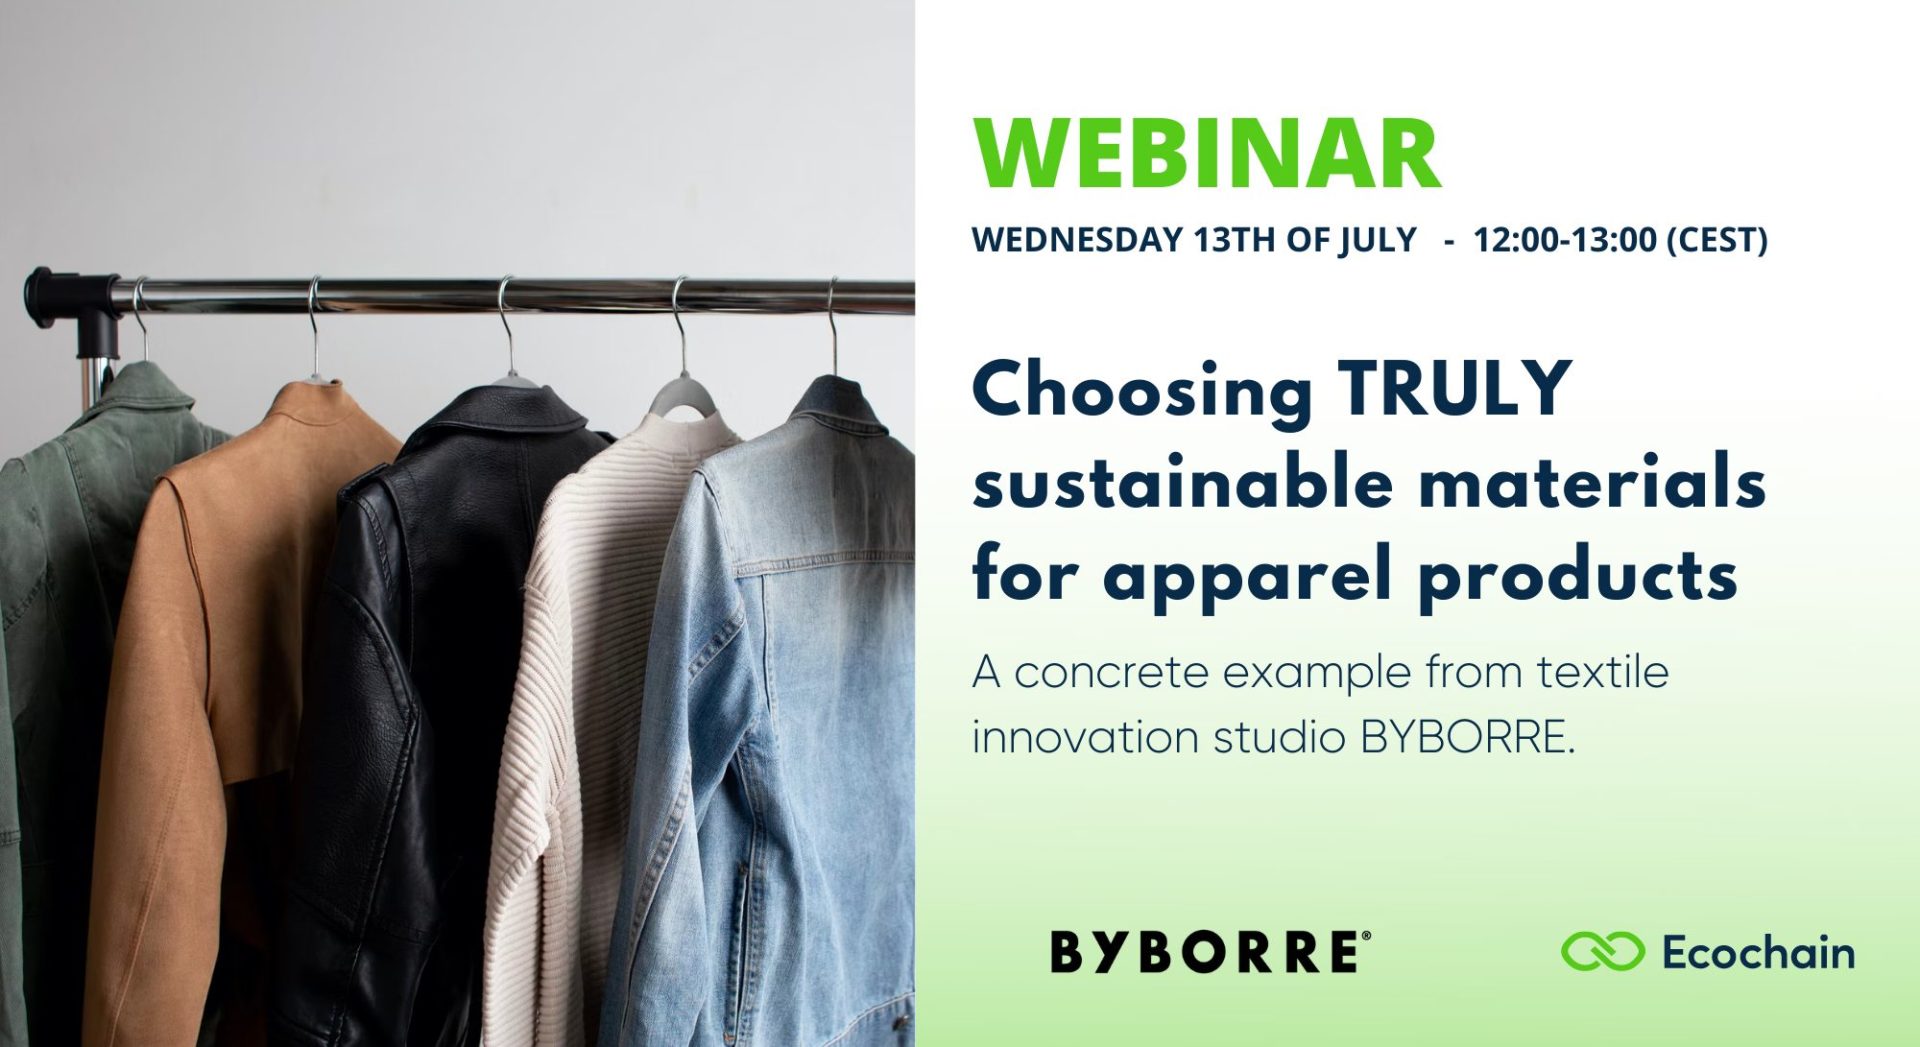 Webinar: 'Choosing TRULY sustainable materials for apparel products - A concrete example from BYBORRE'